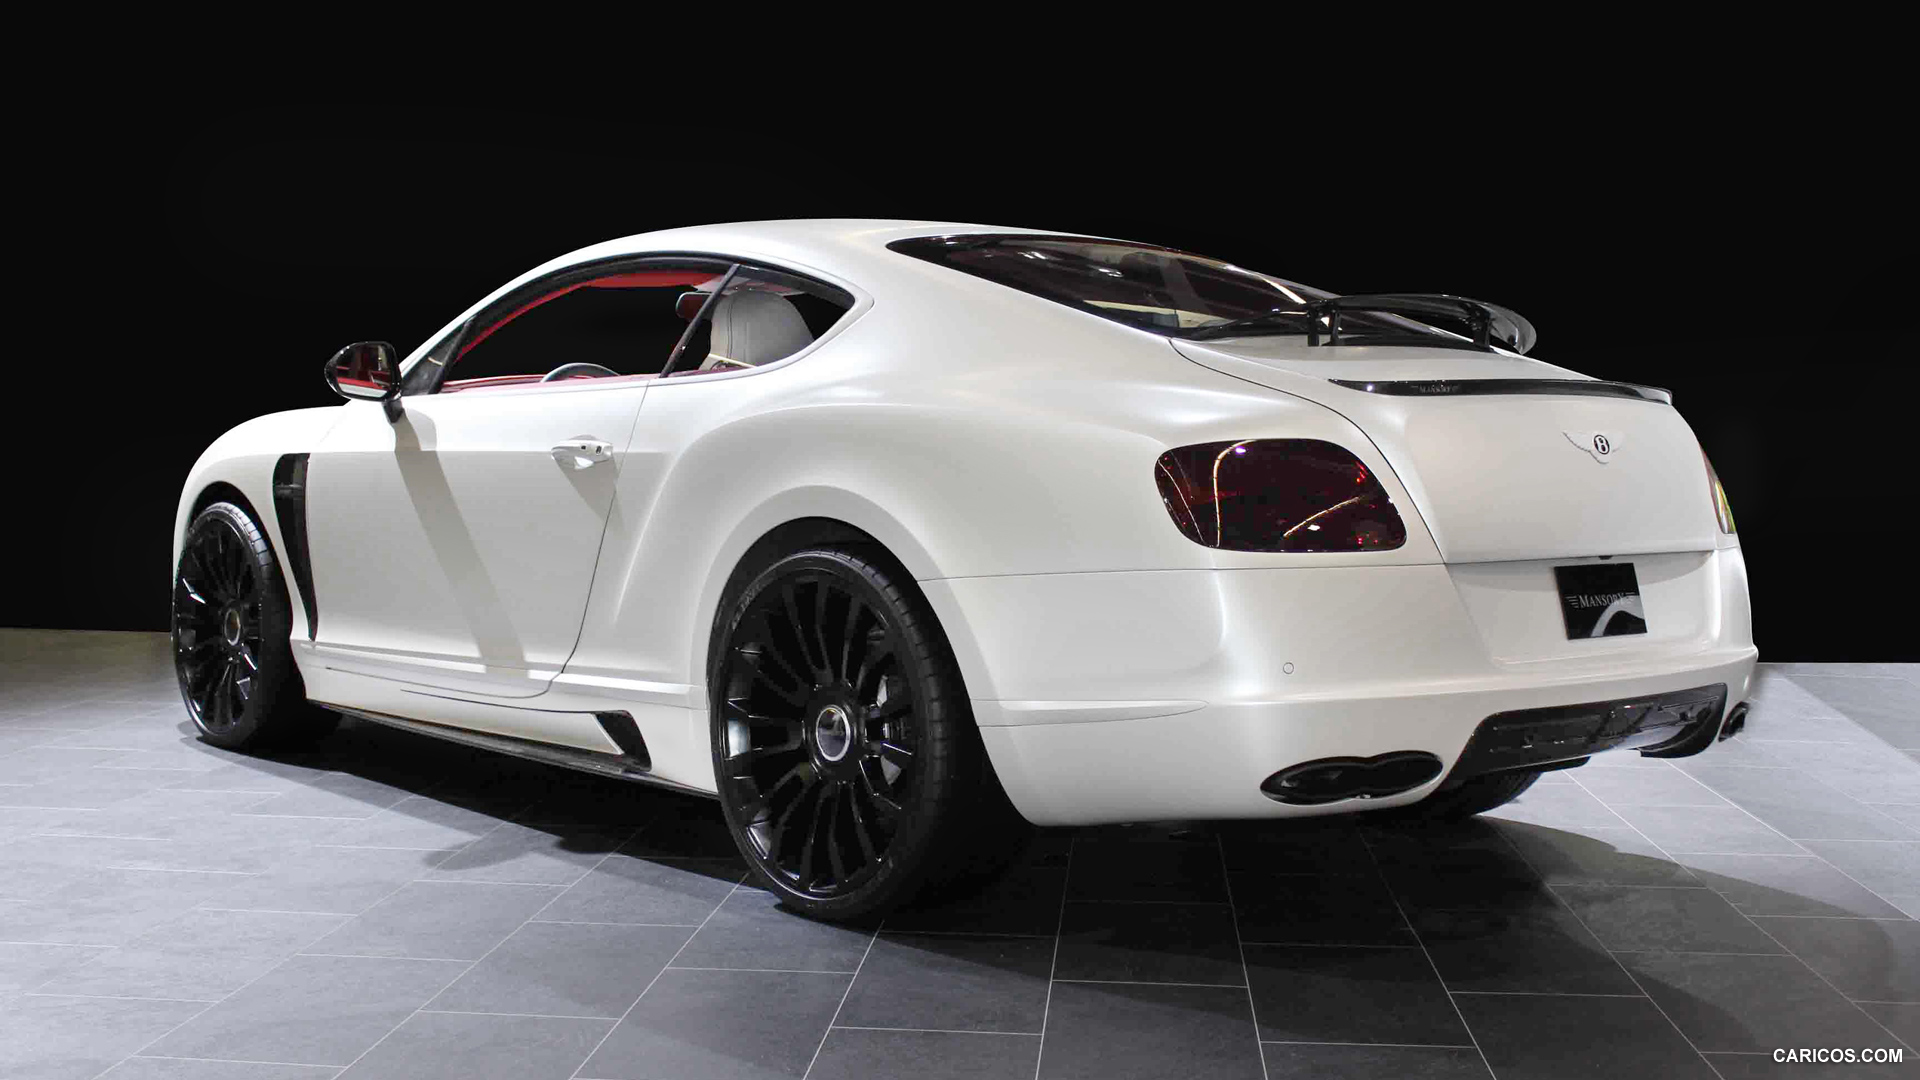 2012 Mansory Bentley Continental GT  - Rear, #2 of 5